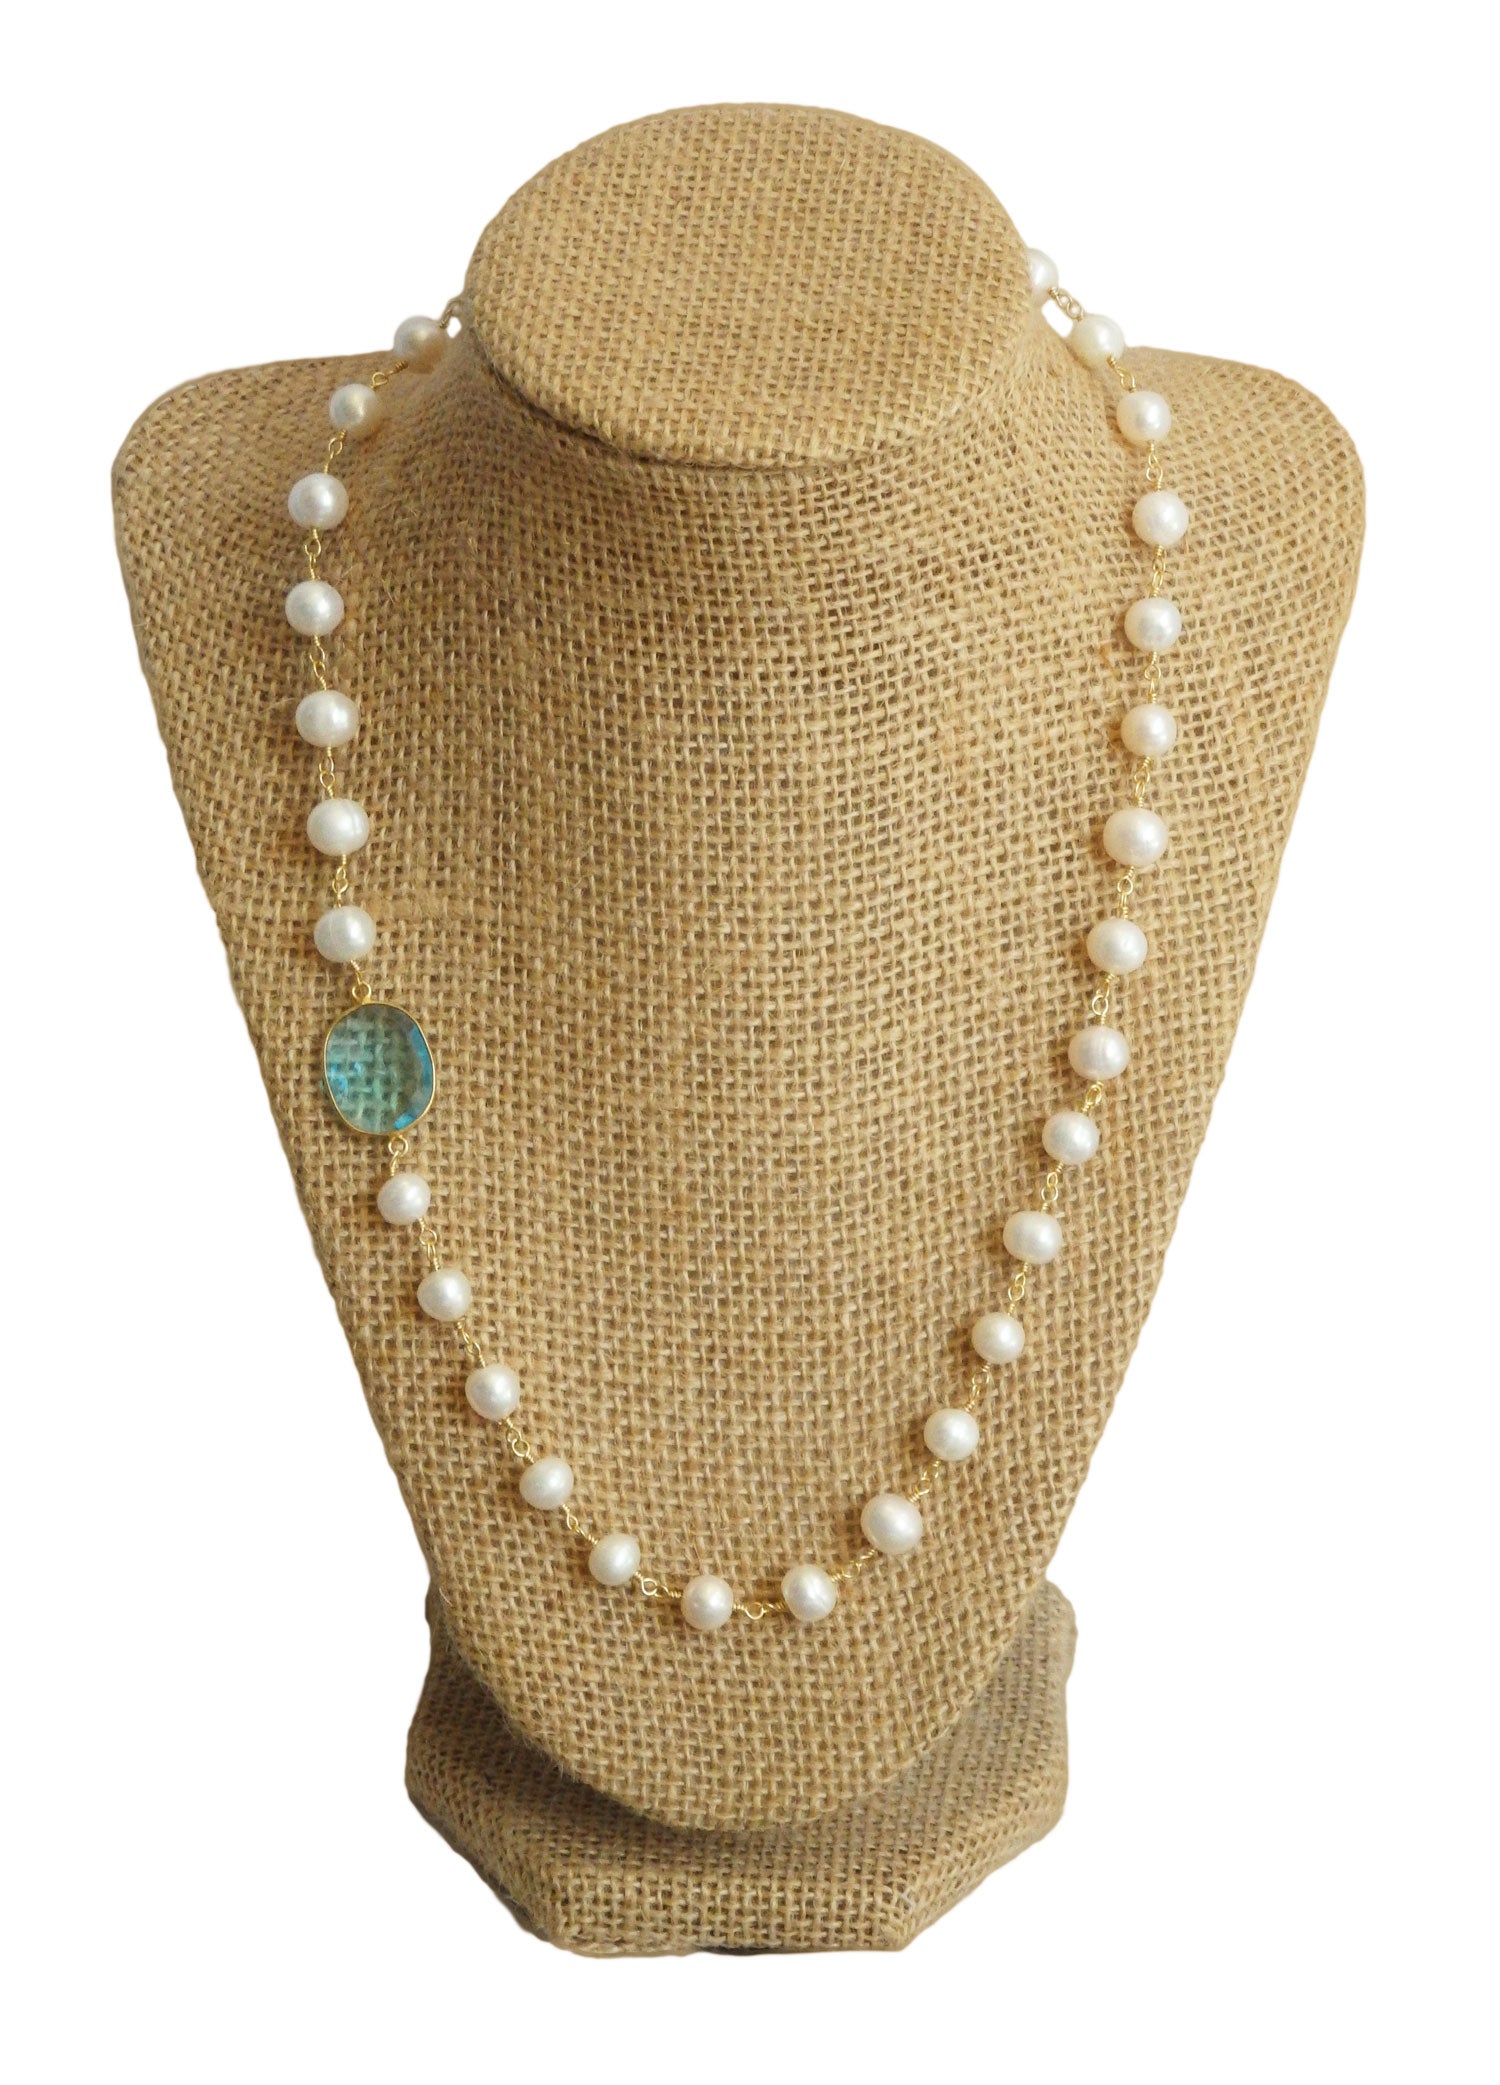 Trésors de St Barth - Leathered pearl necklace from St Barth. Shop now !